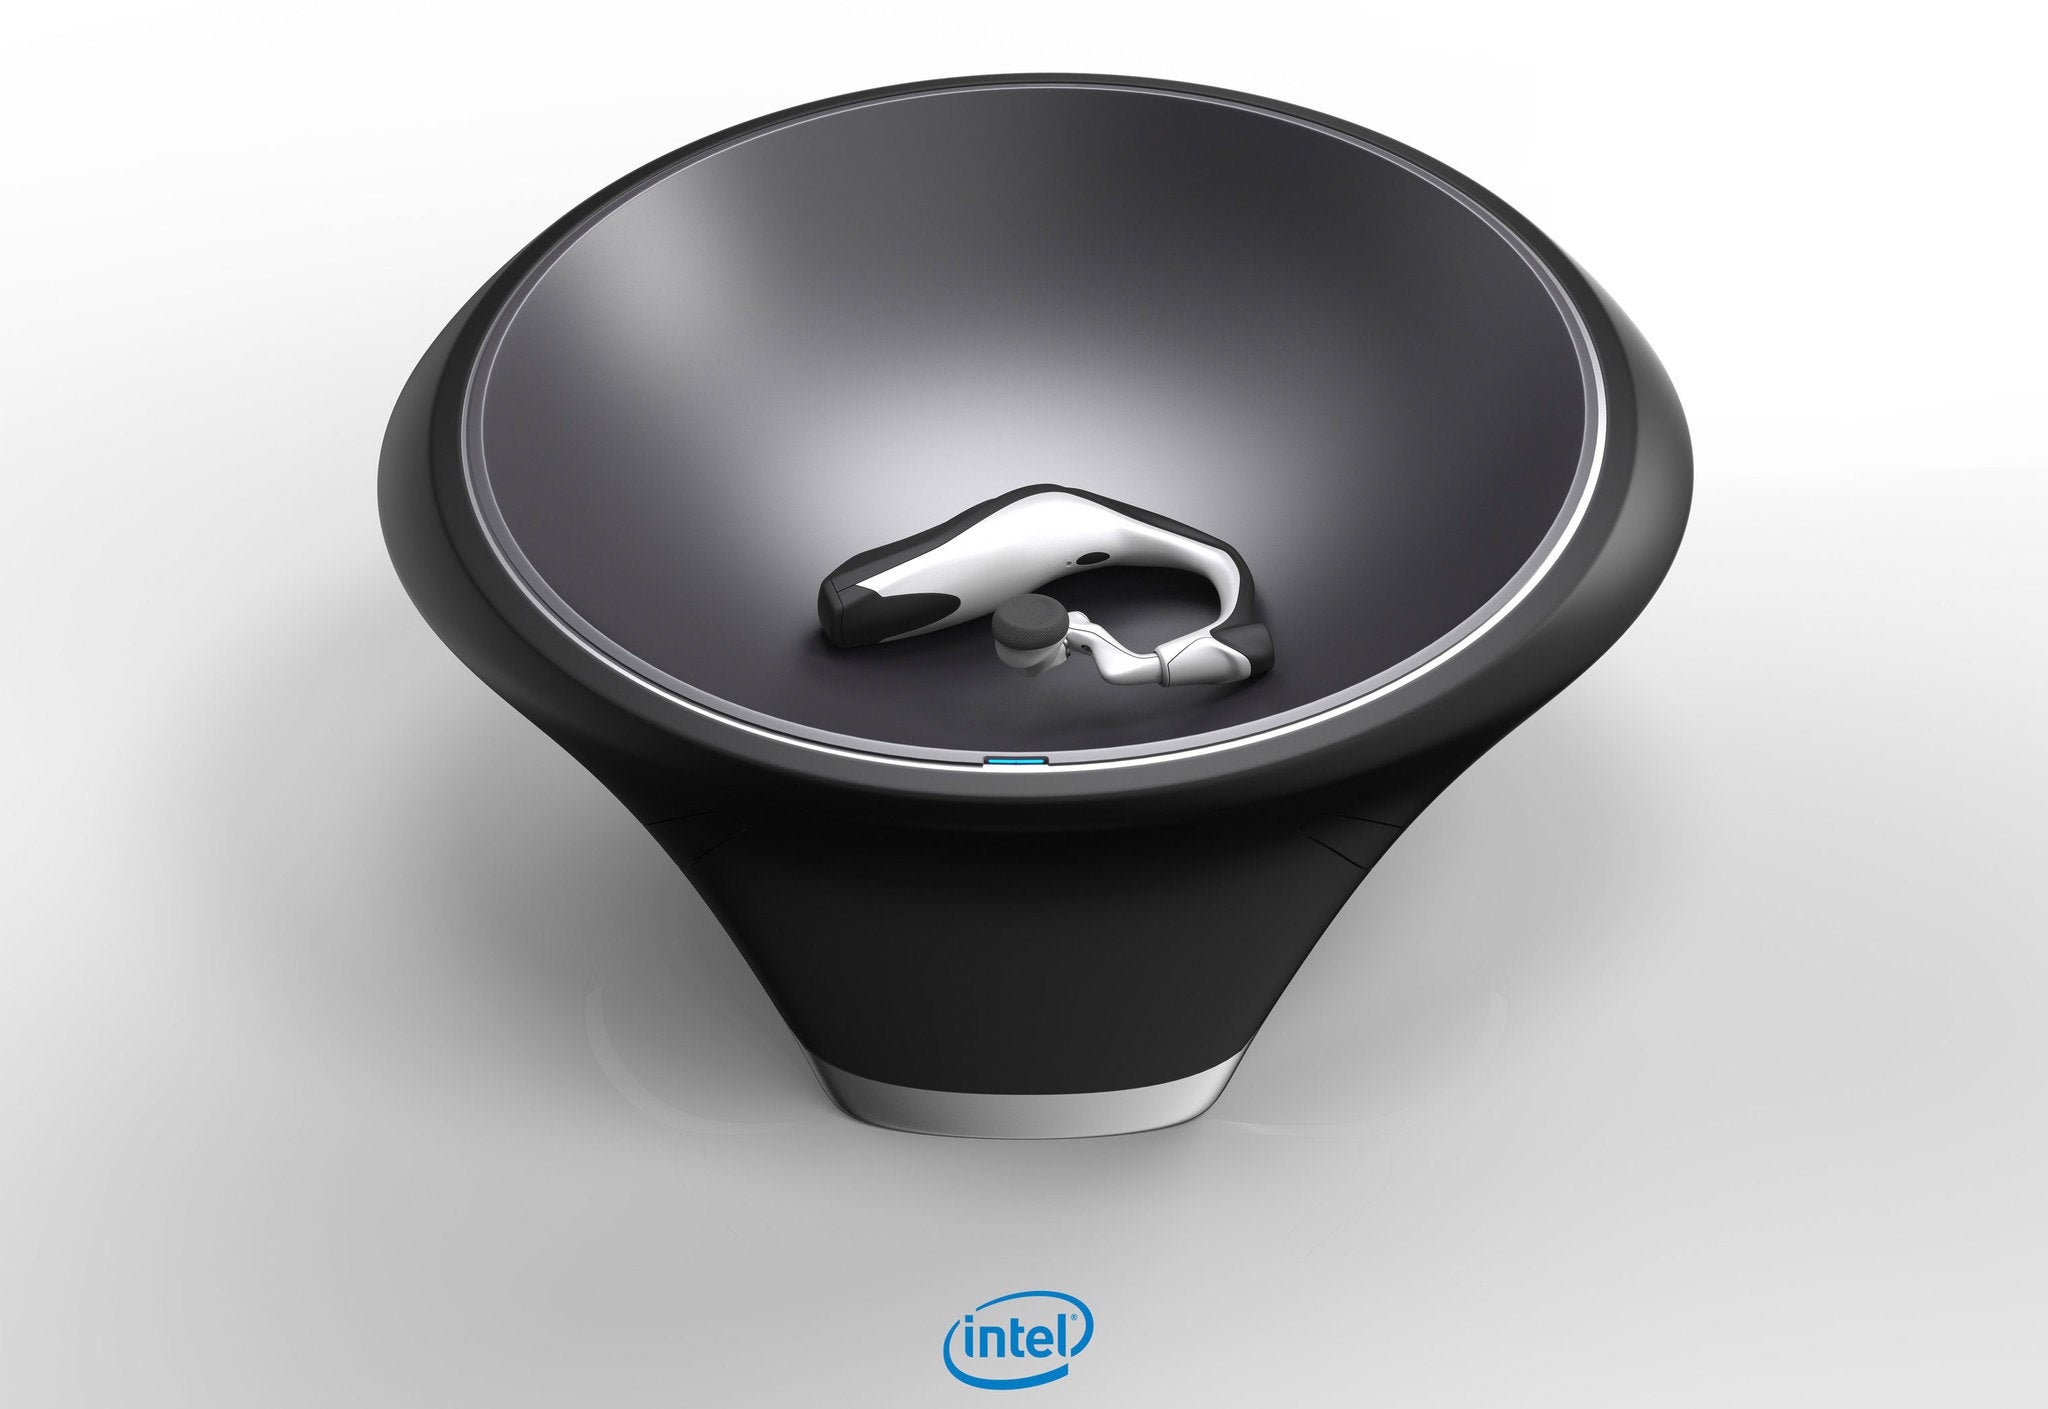 Intel's 'smartbowl' is around 10 inches across and uses magnetic resonance technology to charge multiple devices anywhere in the bowl.